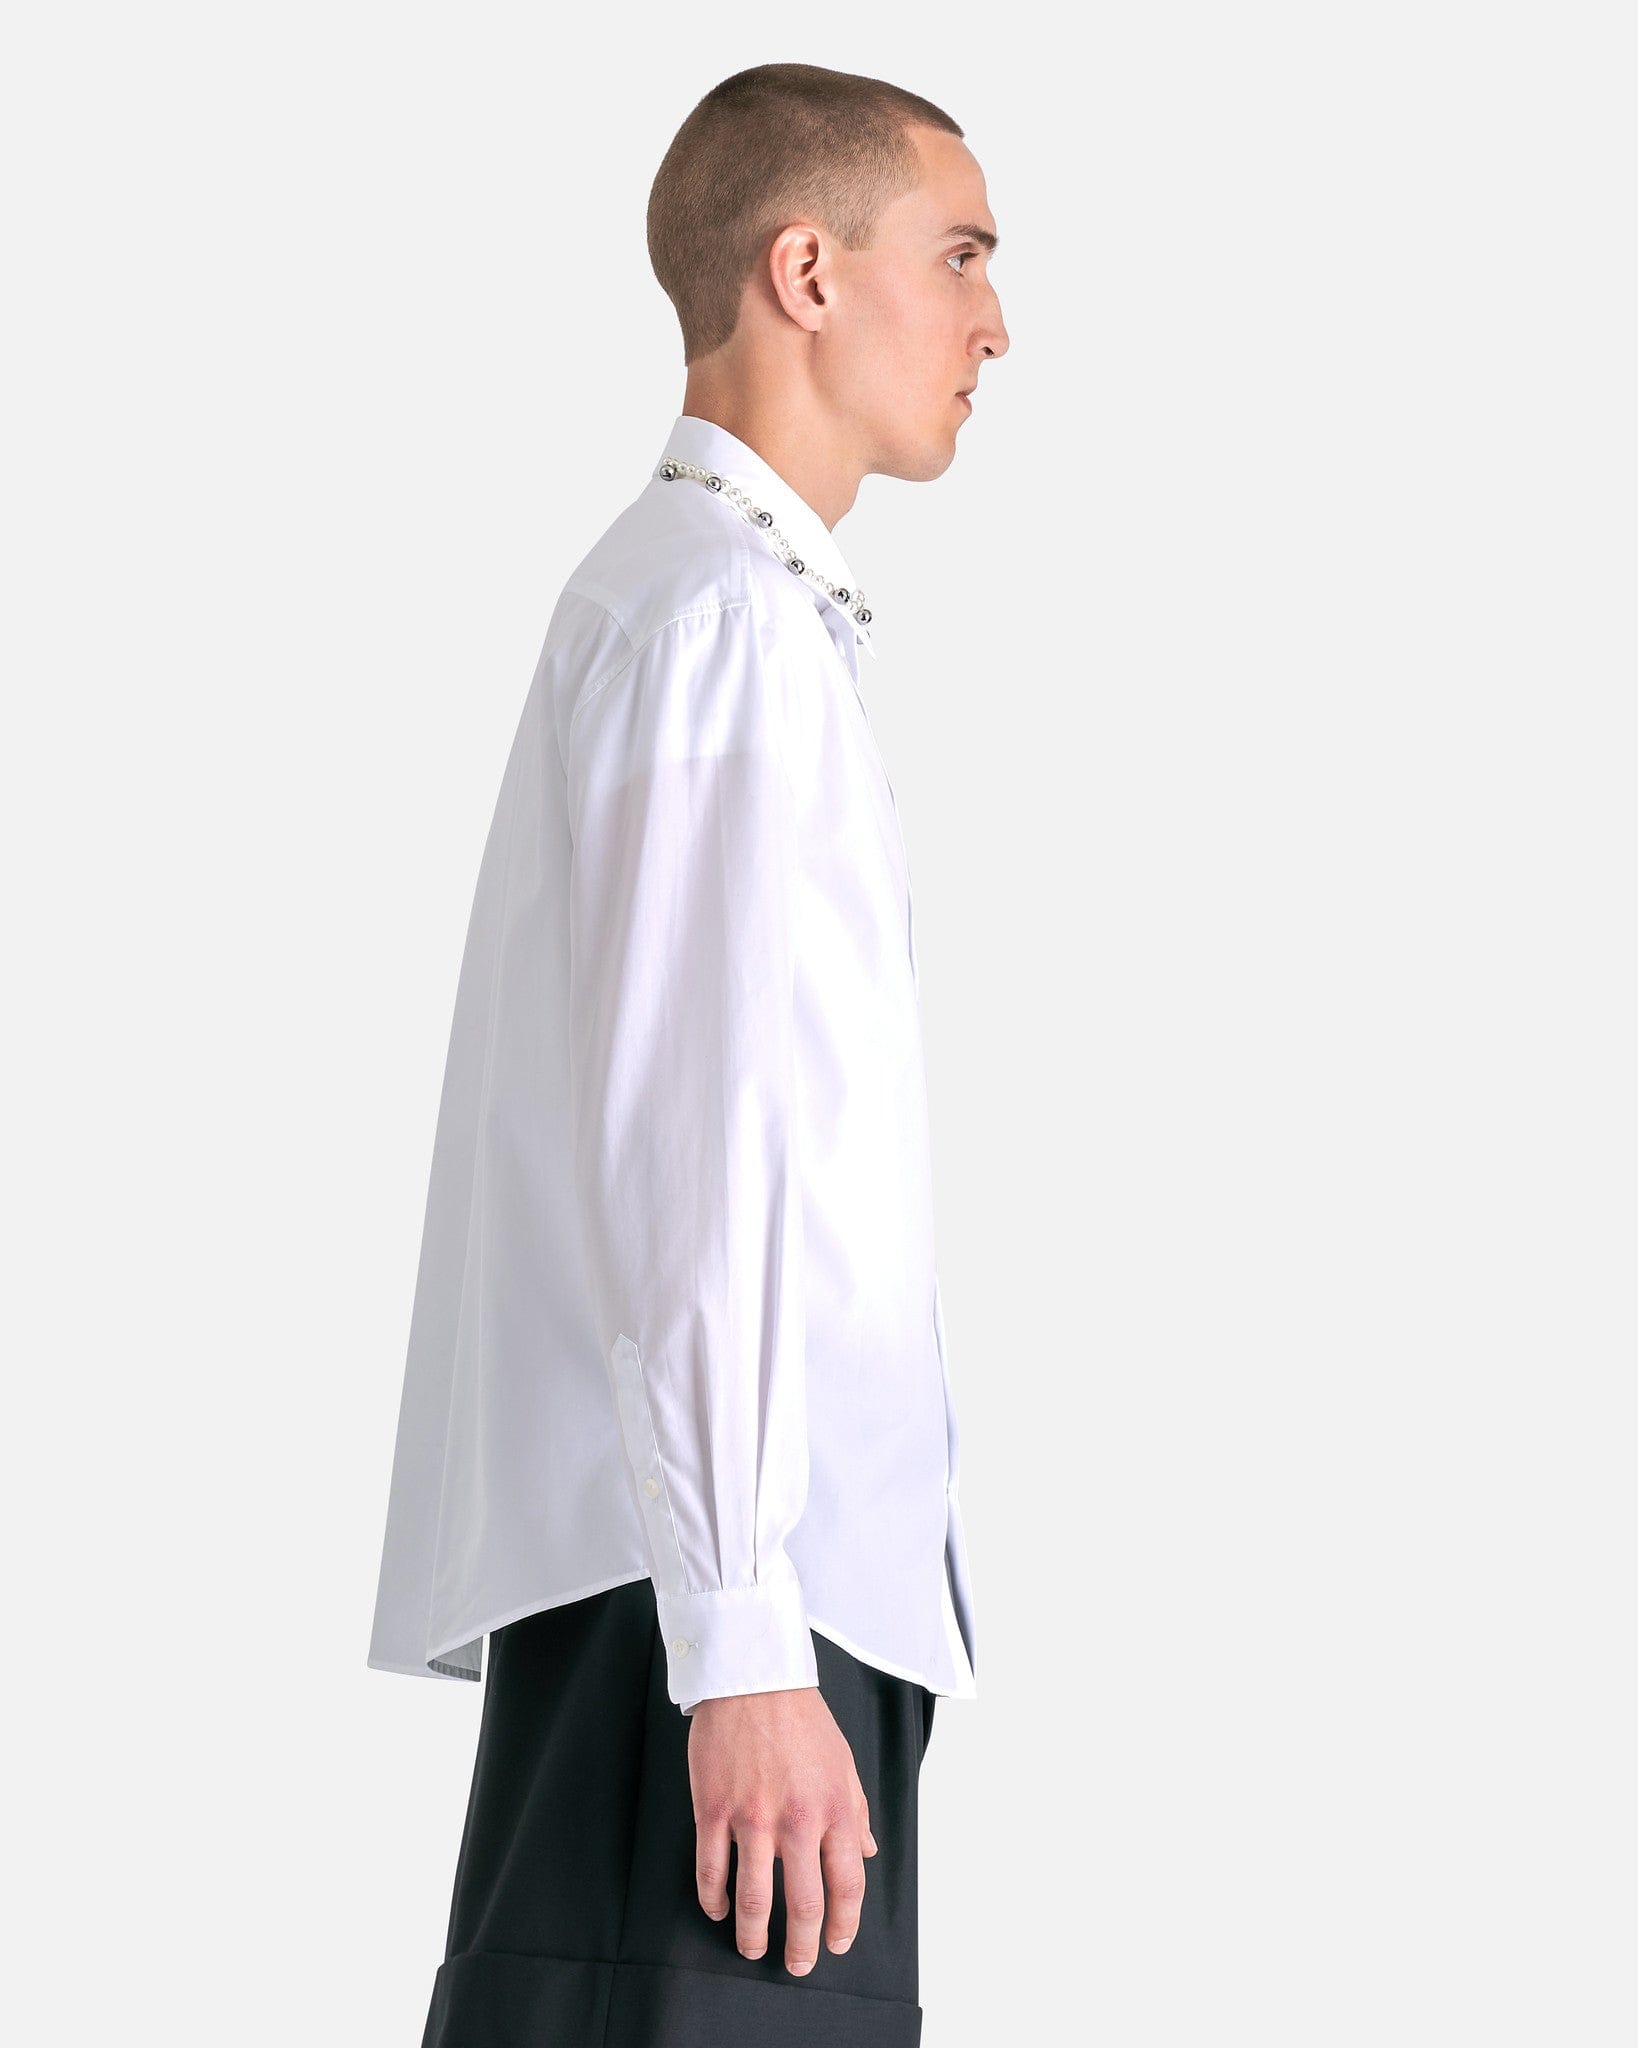 Simone Rocha Men's Shirts Beaded Bell Classic Fit Shirt in White/Pearl